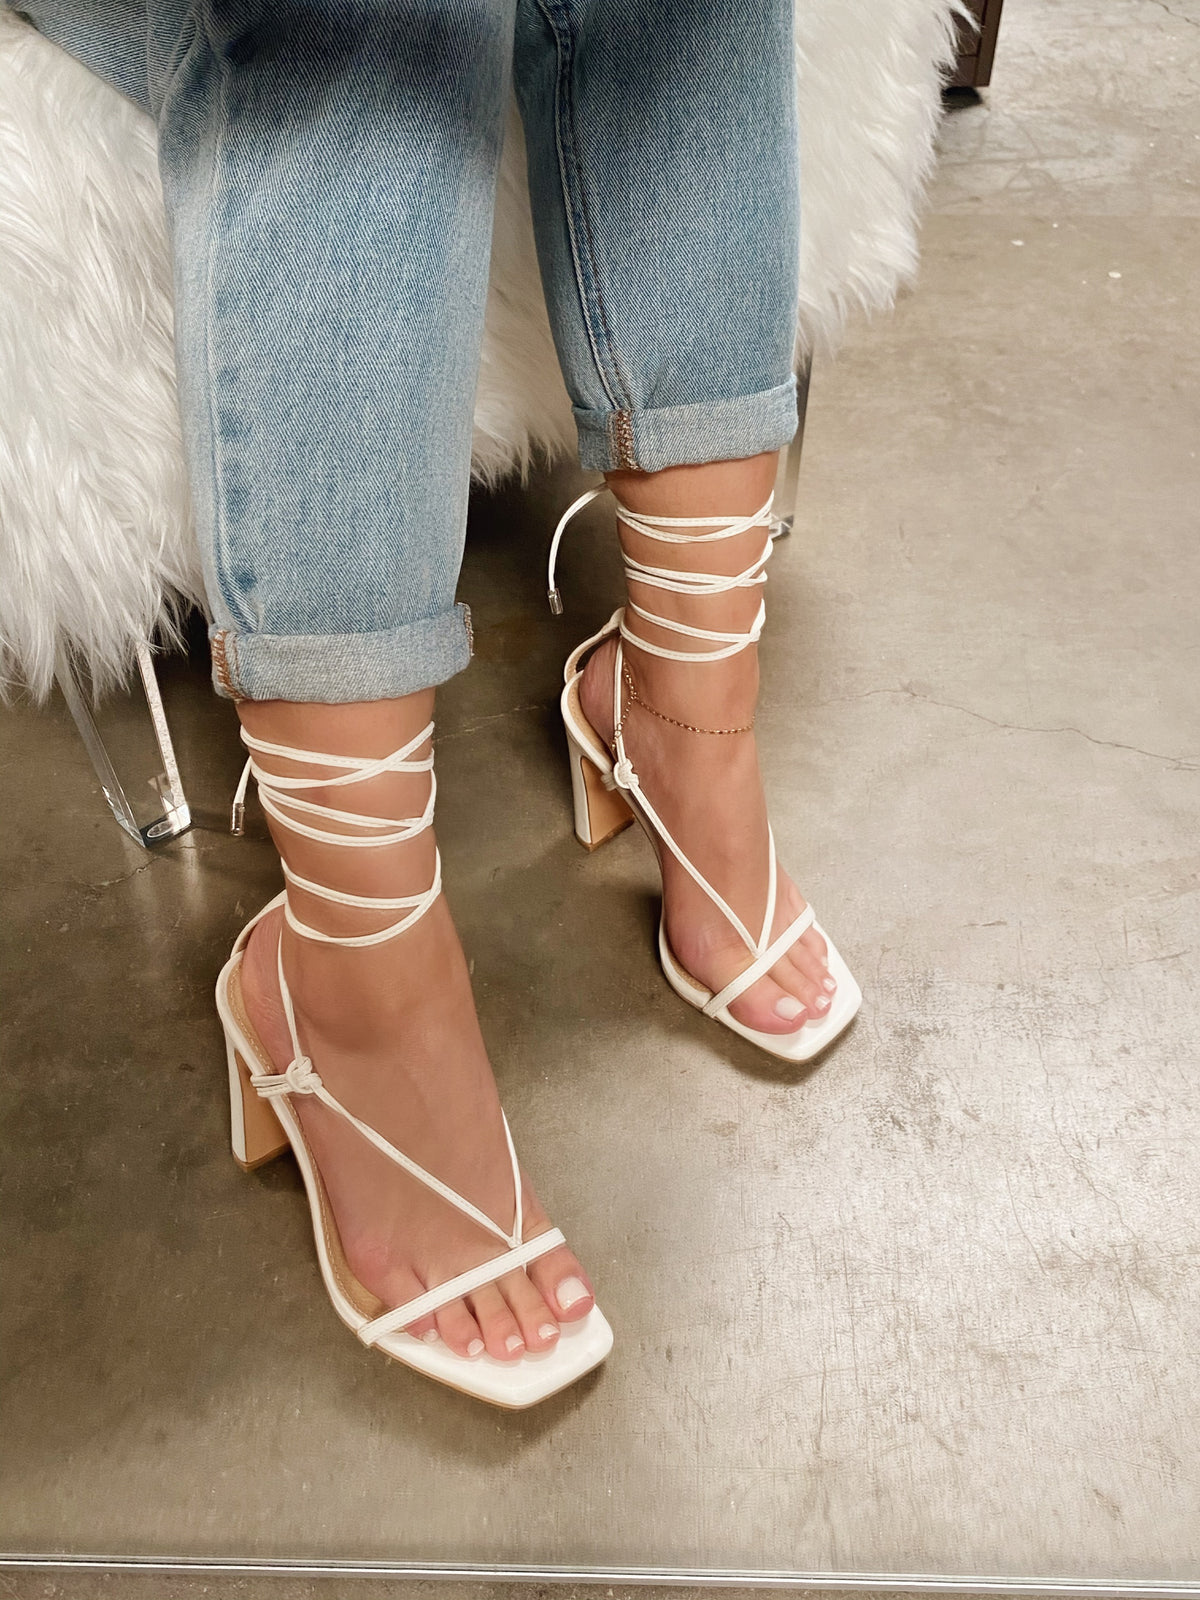 Allure Lace Up Heel